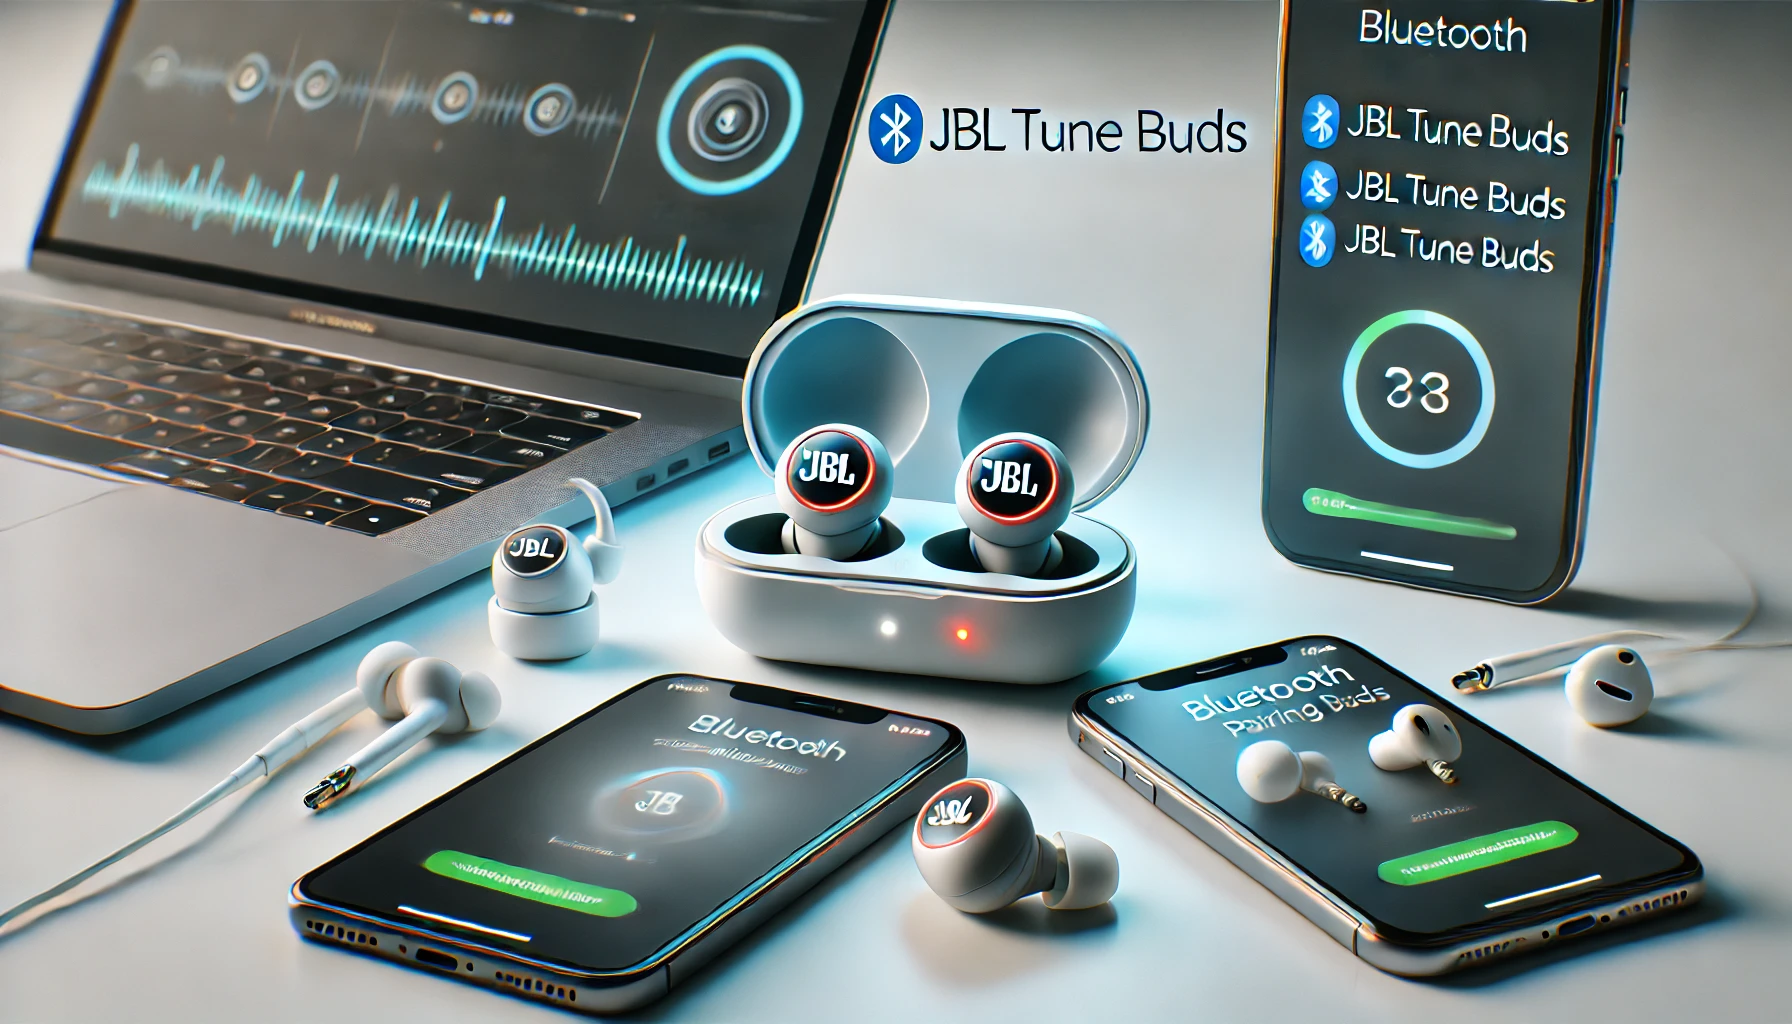 How to Pair JBL Tune Buds | Fix Not Pairing Issue